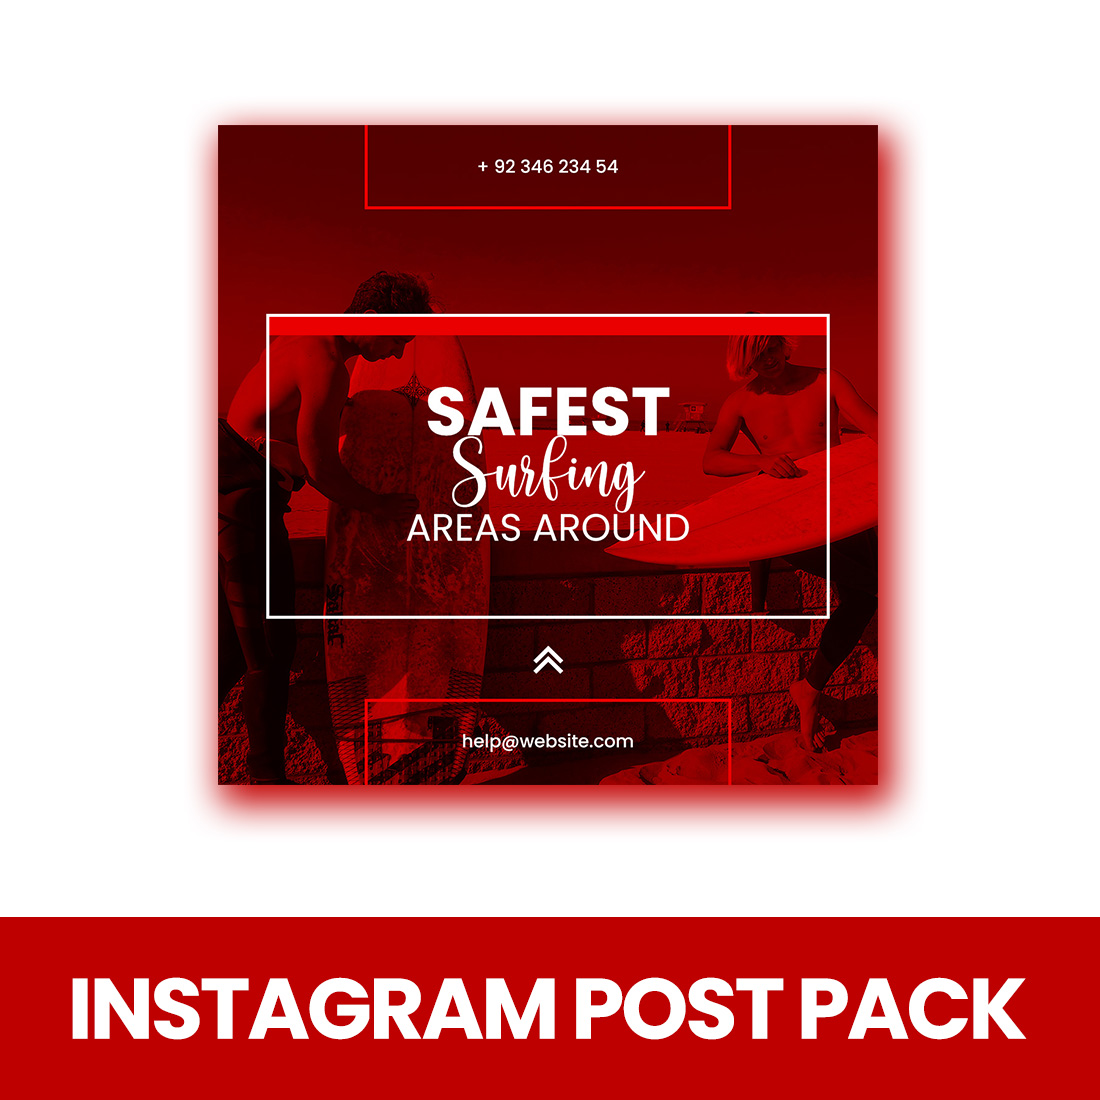 Modern Red Instagram Post Pack (Quotes - Sports) cover image.